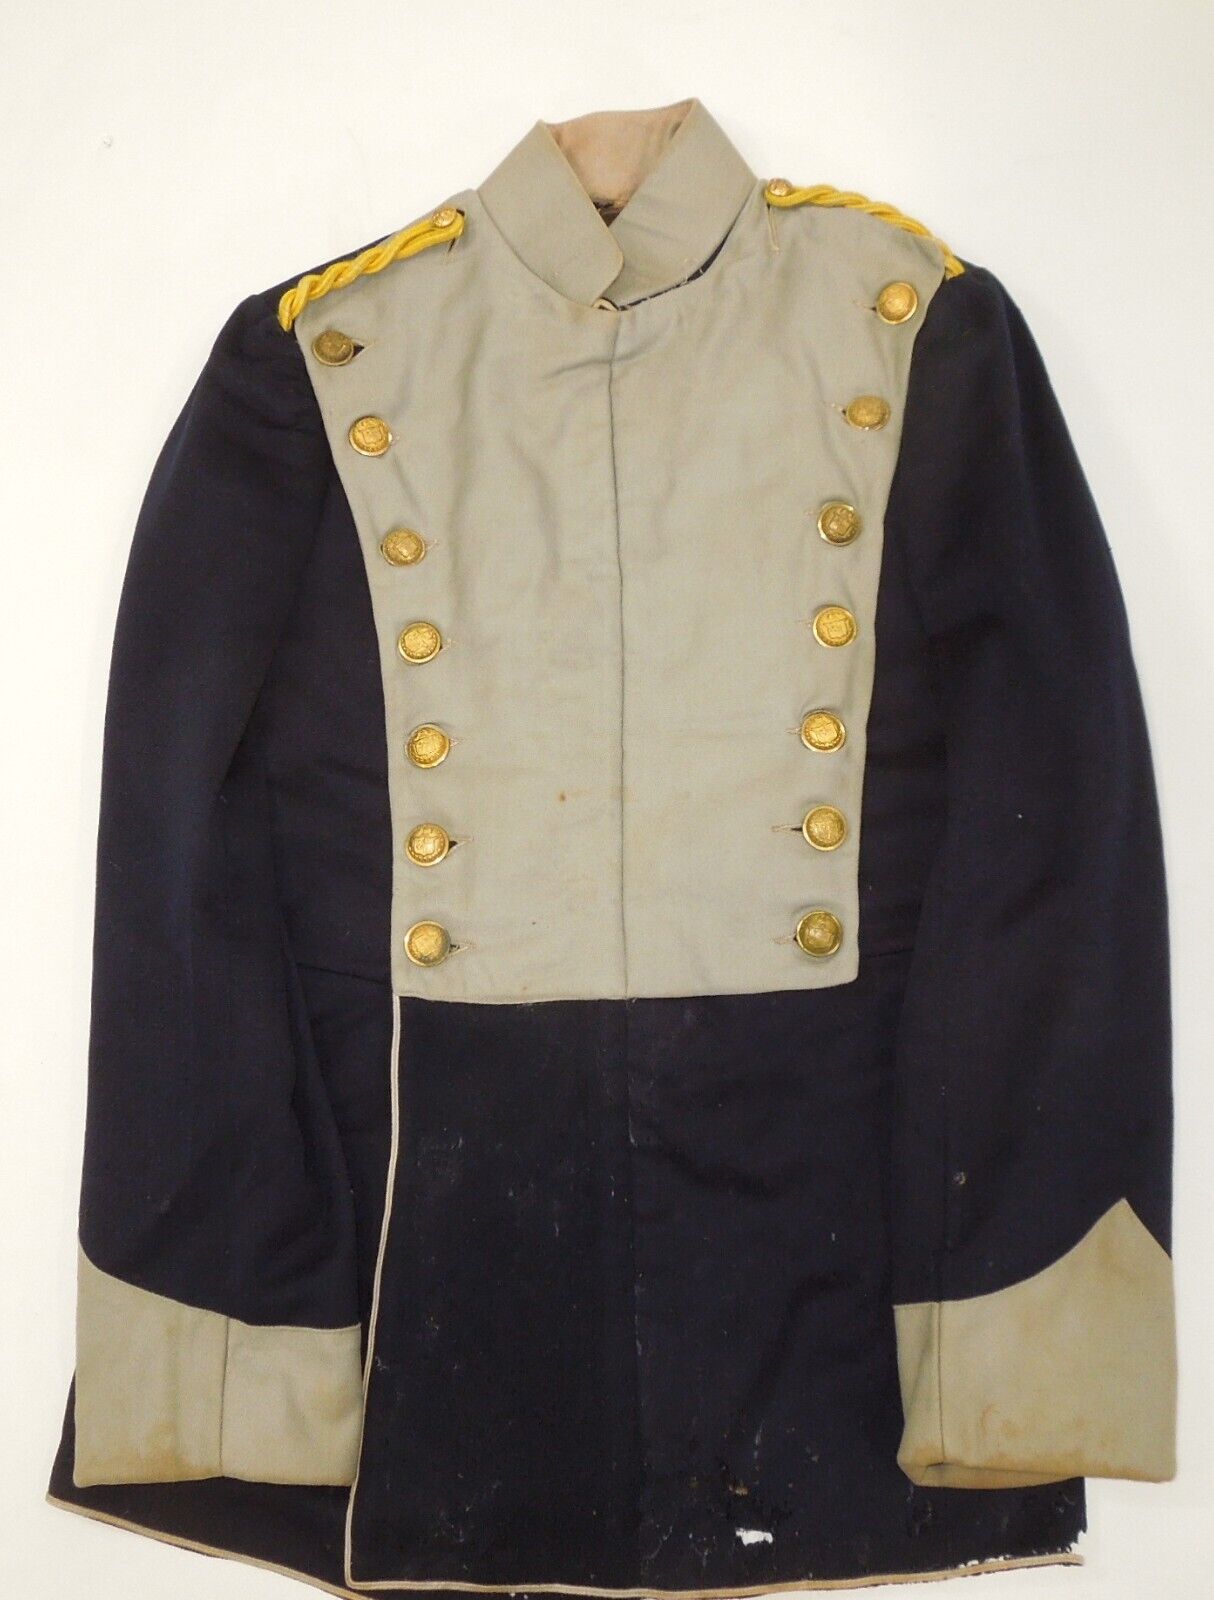 1899 New York National Guard Army Uniform Coat Used in Hollywood Movies